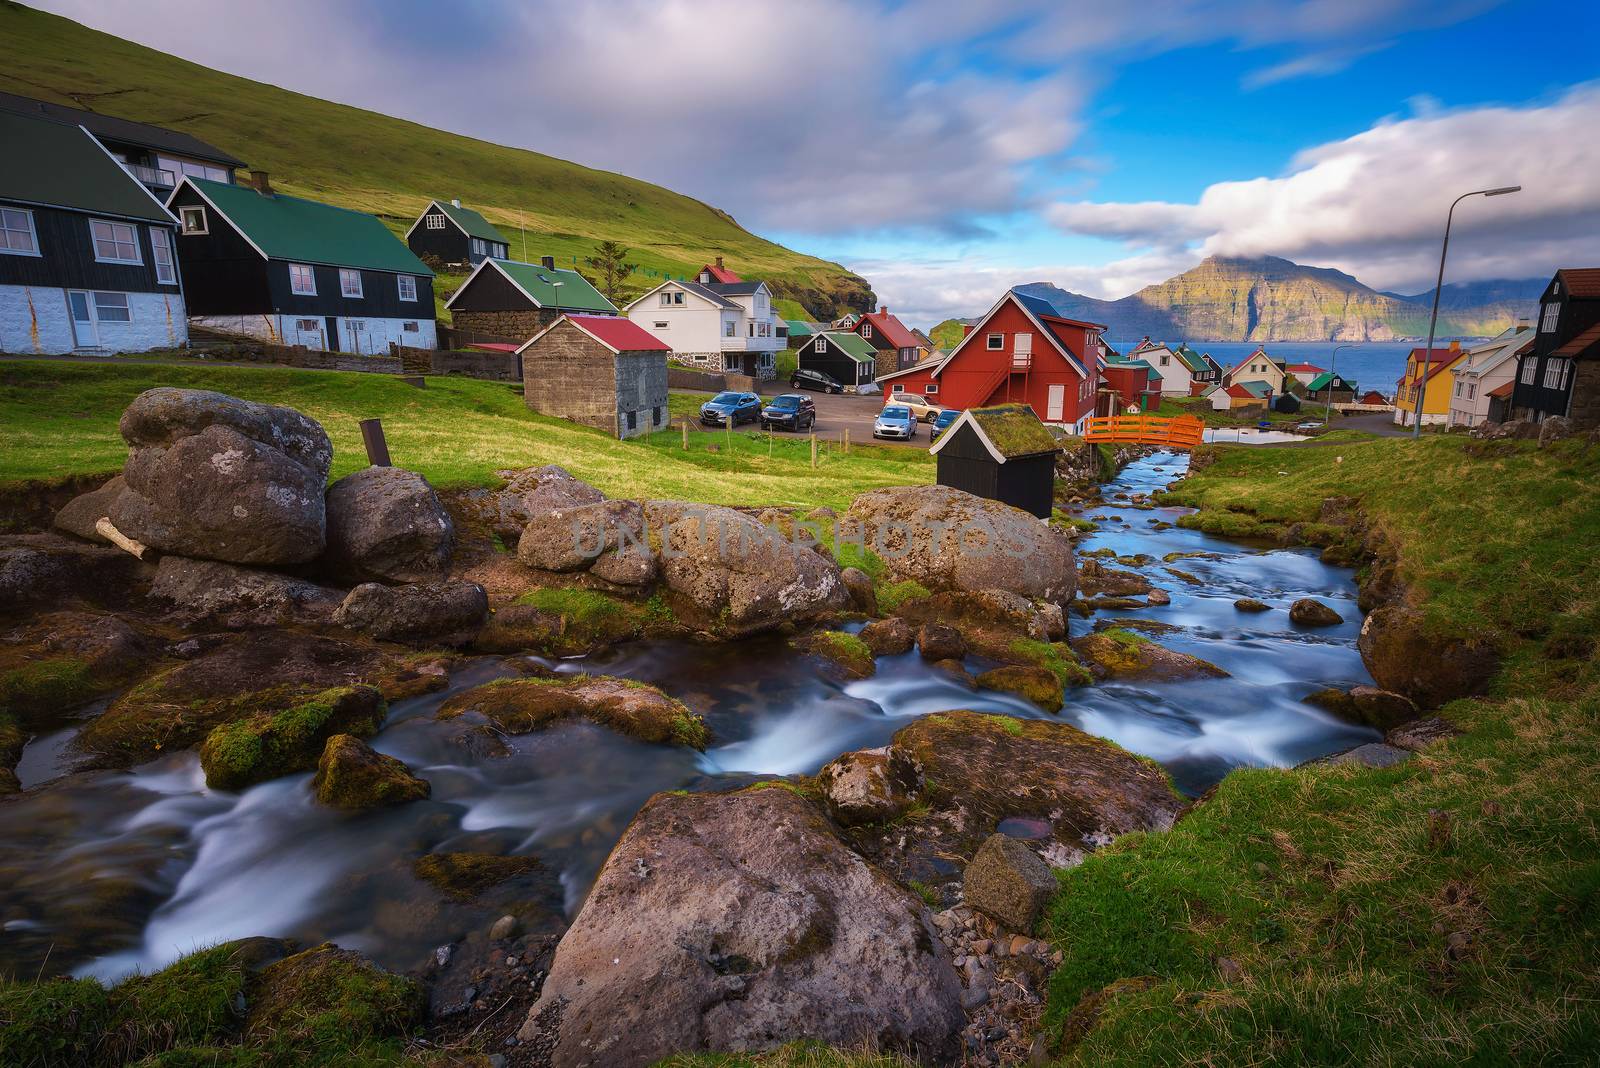 Village of Gjogv on Faroe Islands with colourful houses and a creek, with views of Kalsoy island located across the fjord. Long exposure.